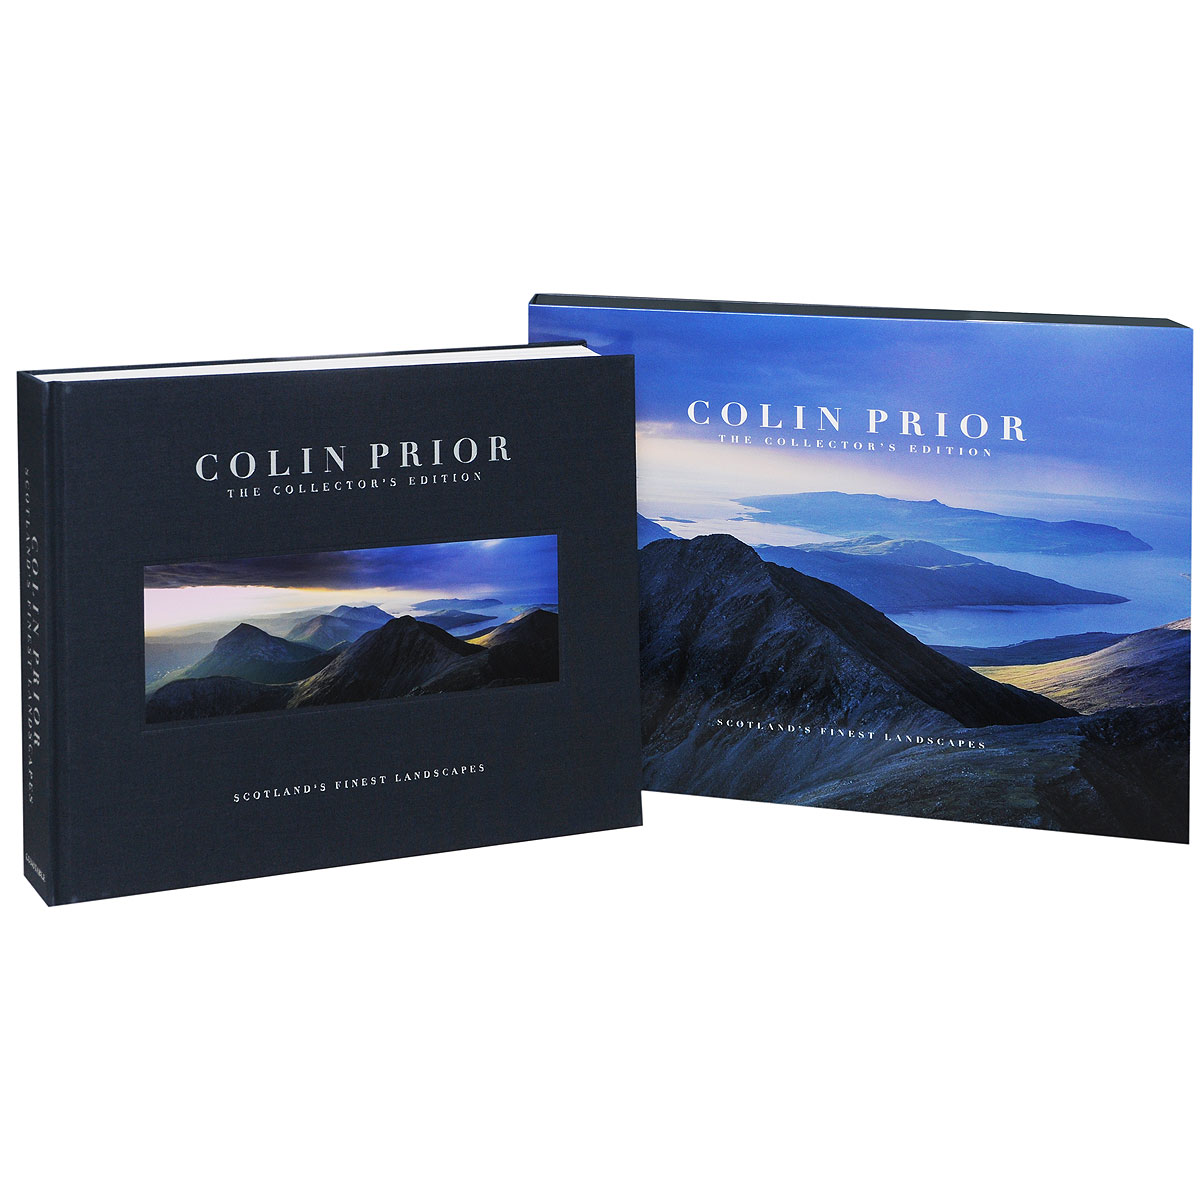 Scotland's Finest Landscapes: The Collector's Edition: 25 Years